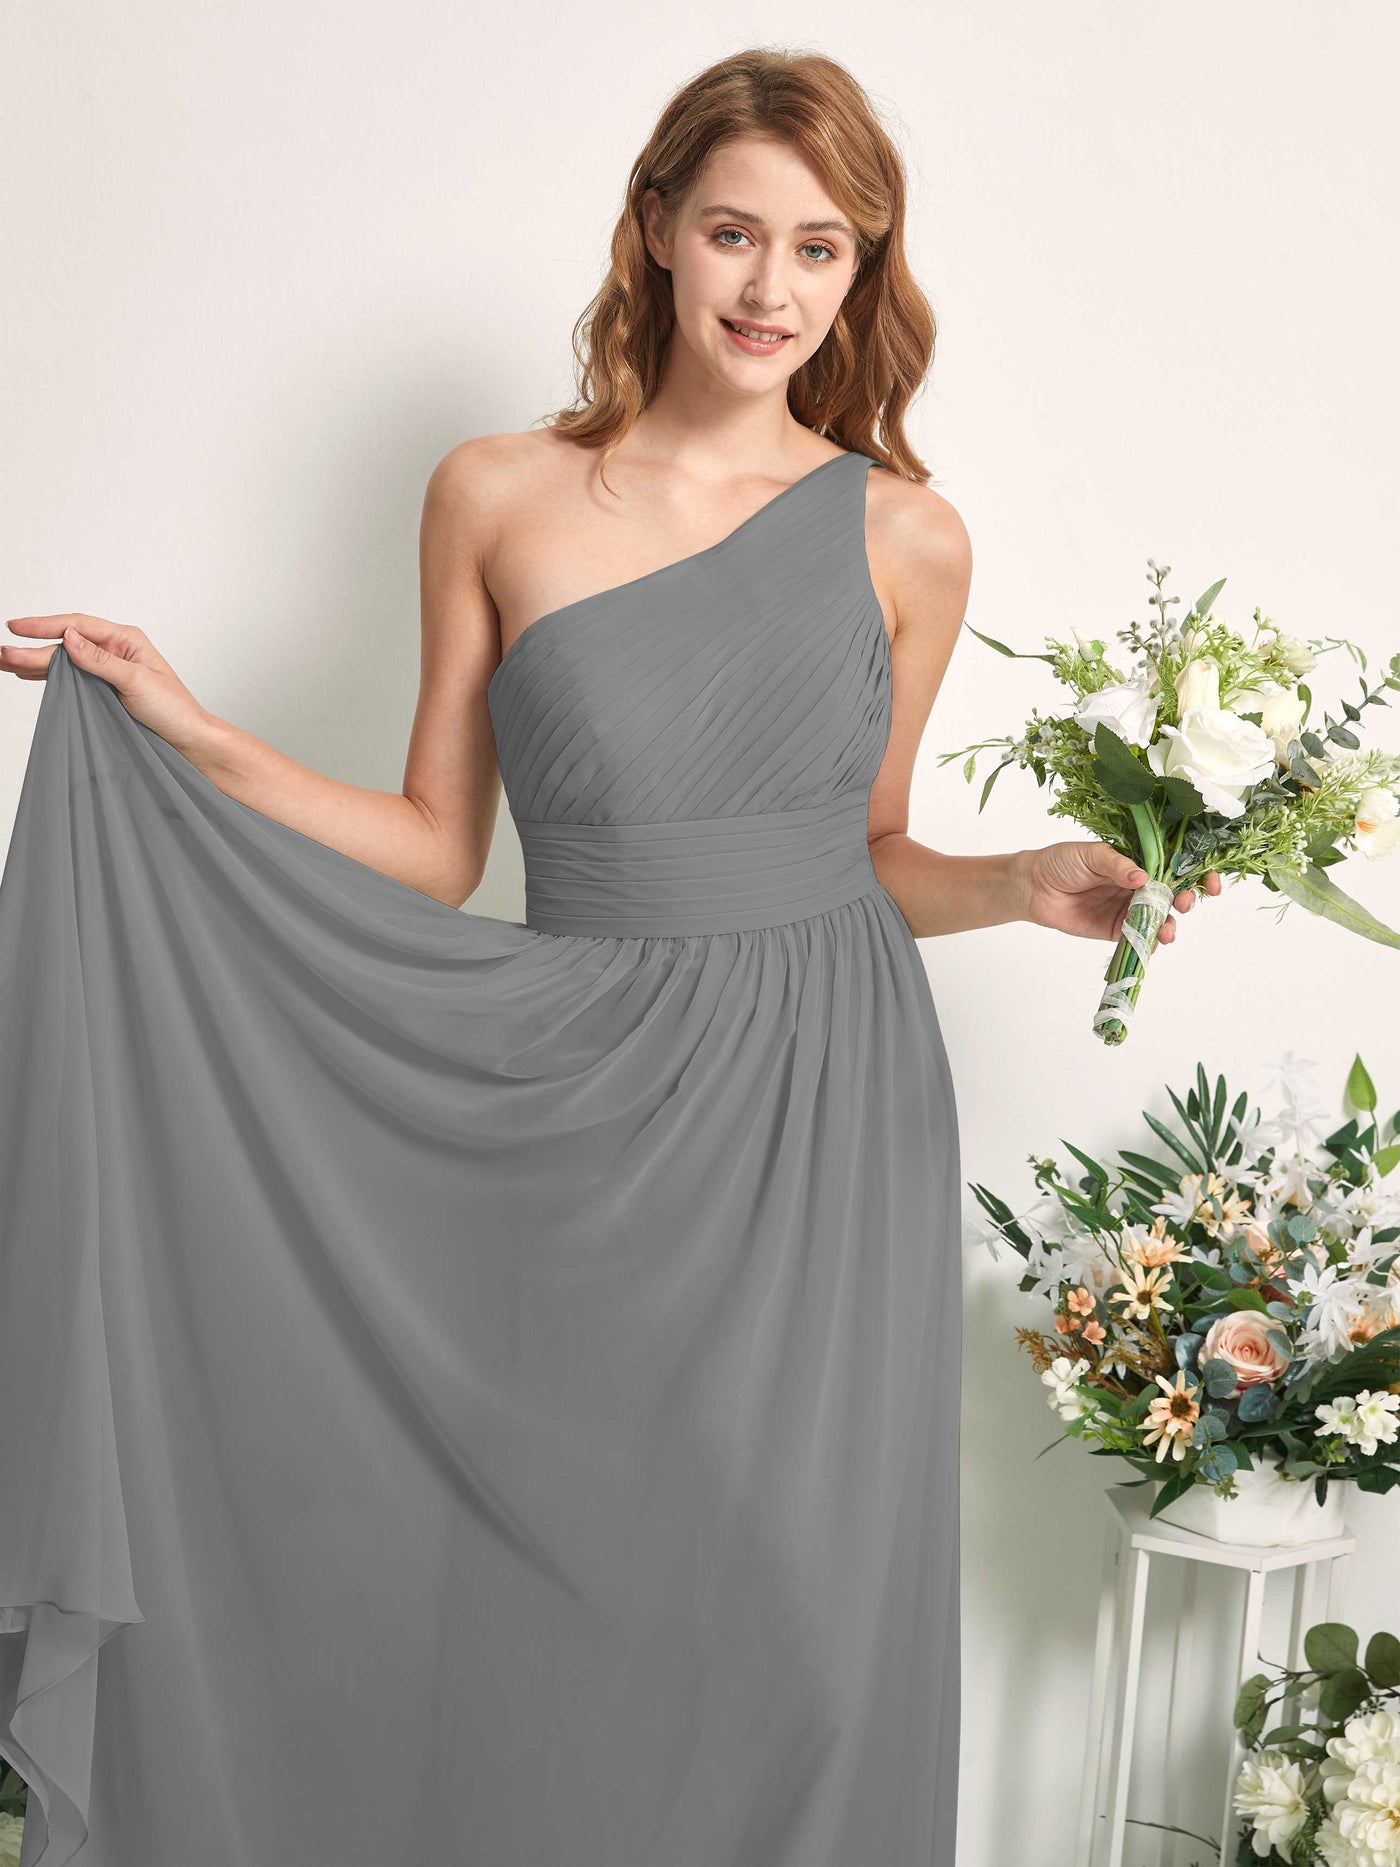 Bridesmaid Dress A-line Chiffon One Shoulder Full Length Sleeveless Wedding Party Dress - Steel Gray (81226720)#color_steel-gray